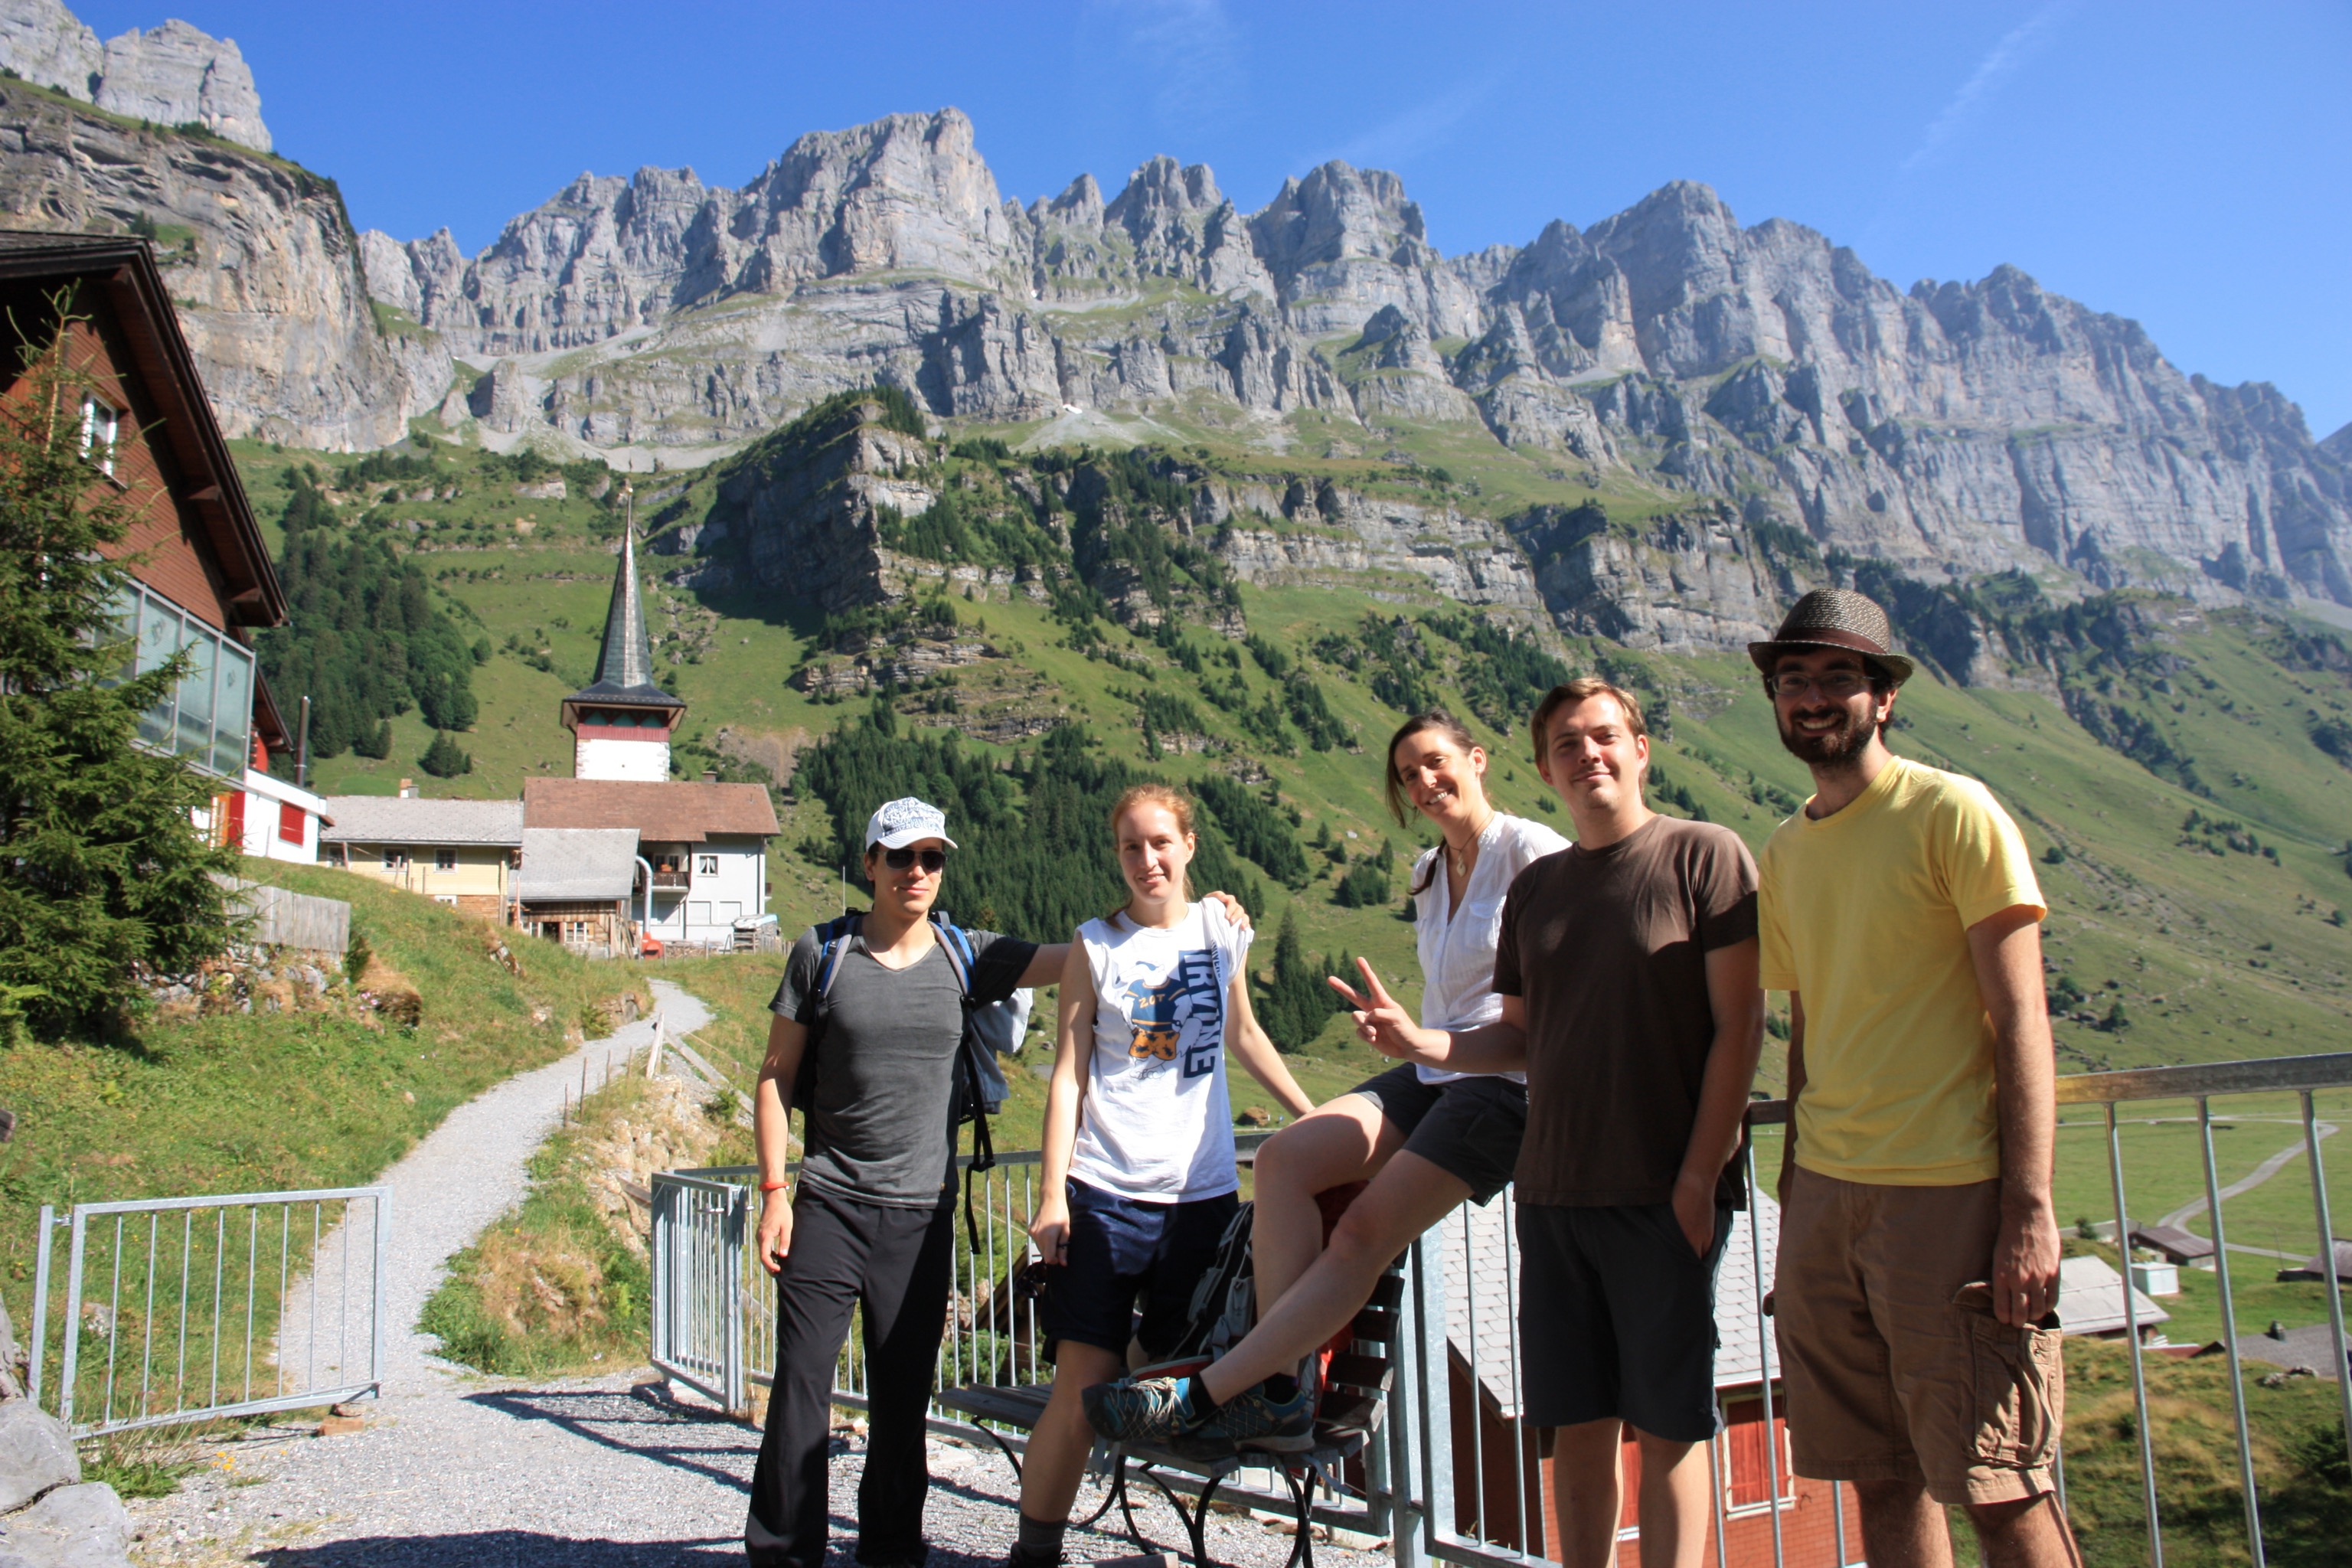 We started our two-day hike in the alp of Urnerboden.